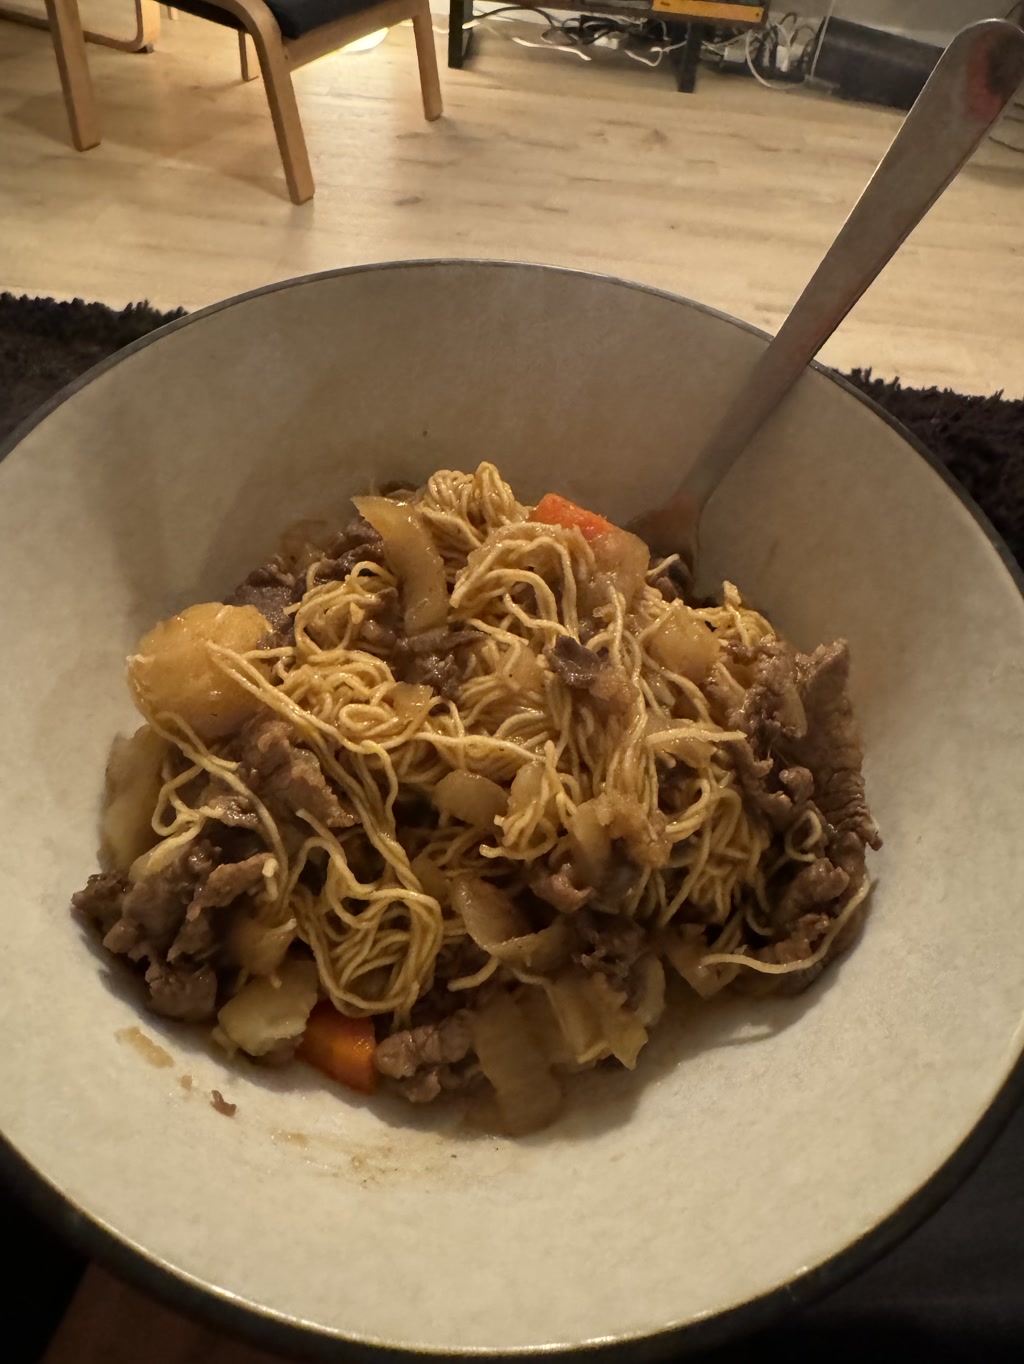 A bowl filled with a stir-fried noodle dish is present, featuring what appears to be thin noodles, chunks of beef, and possibly some vegetables like onions and carrots. There is a distinct shine to the ingredients suggesting they may be coated in a sauce or oil. The bowl is sat on a surface with a fork resting inside, indicating the meal is ready to be eaten. The backdrop is a casually set room with chairs and a rug, partially showcasing an indoor domestic setting.